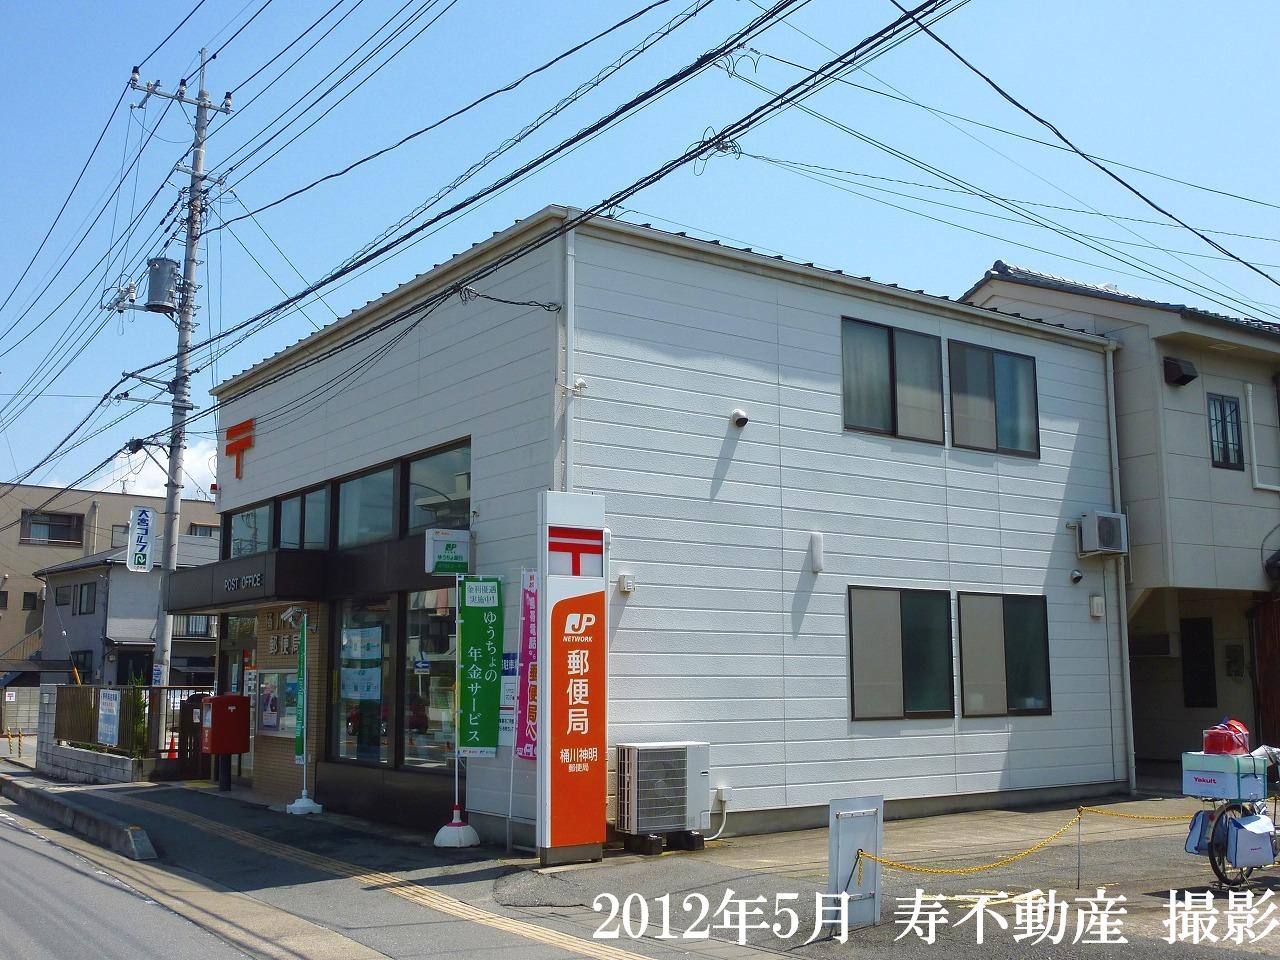 post office. Okegawa Shinmei 495m to the post office (post office)